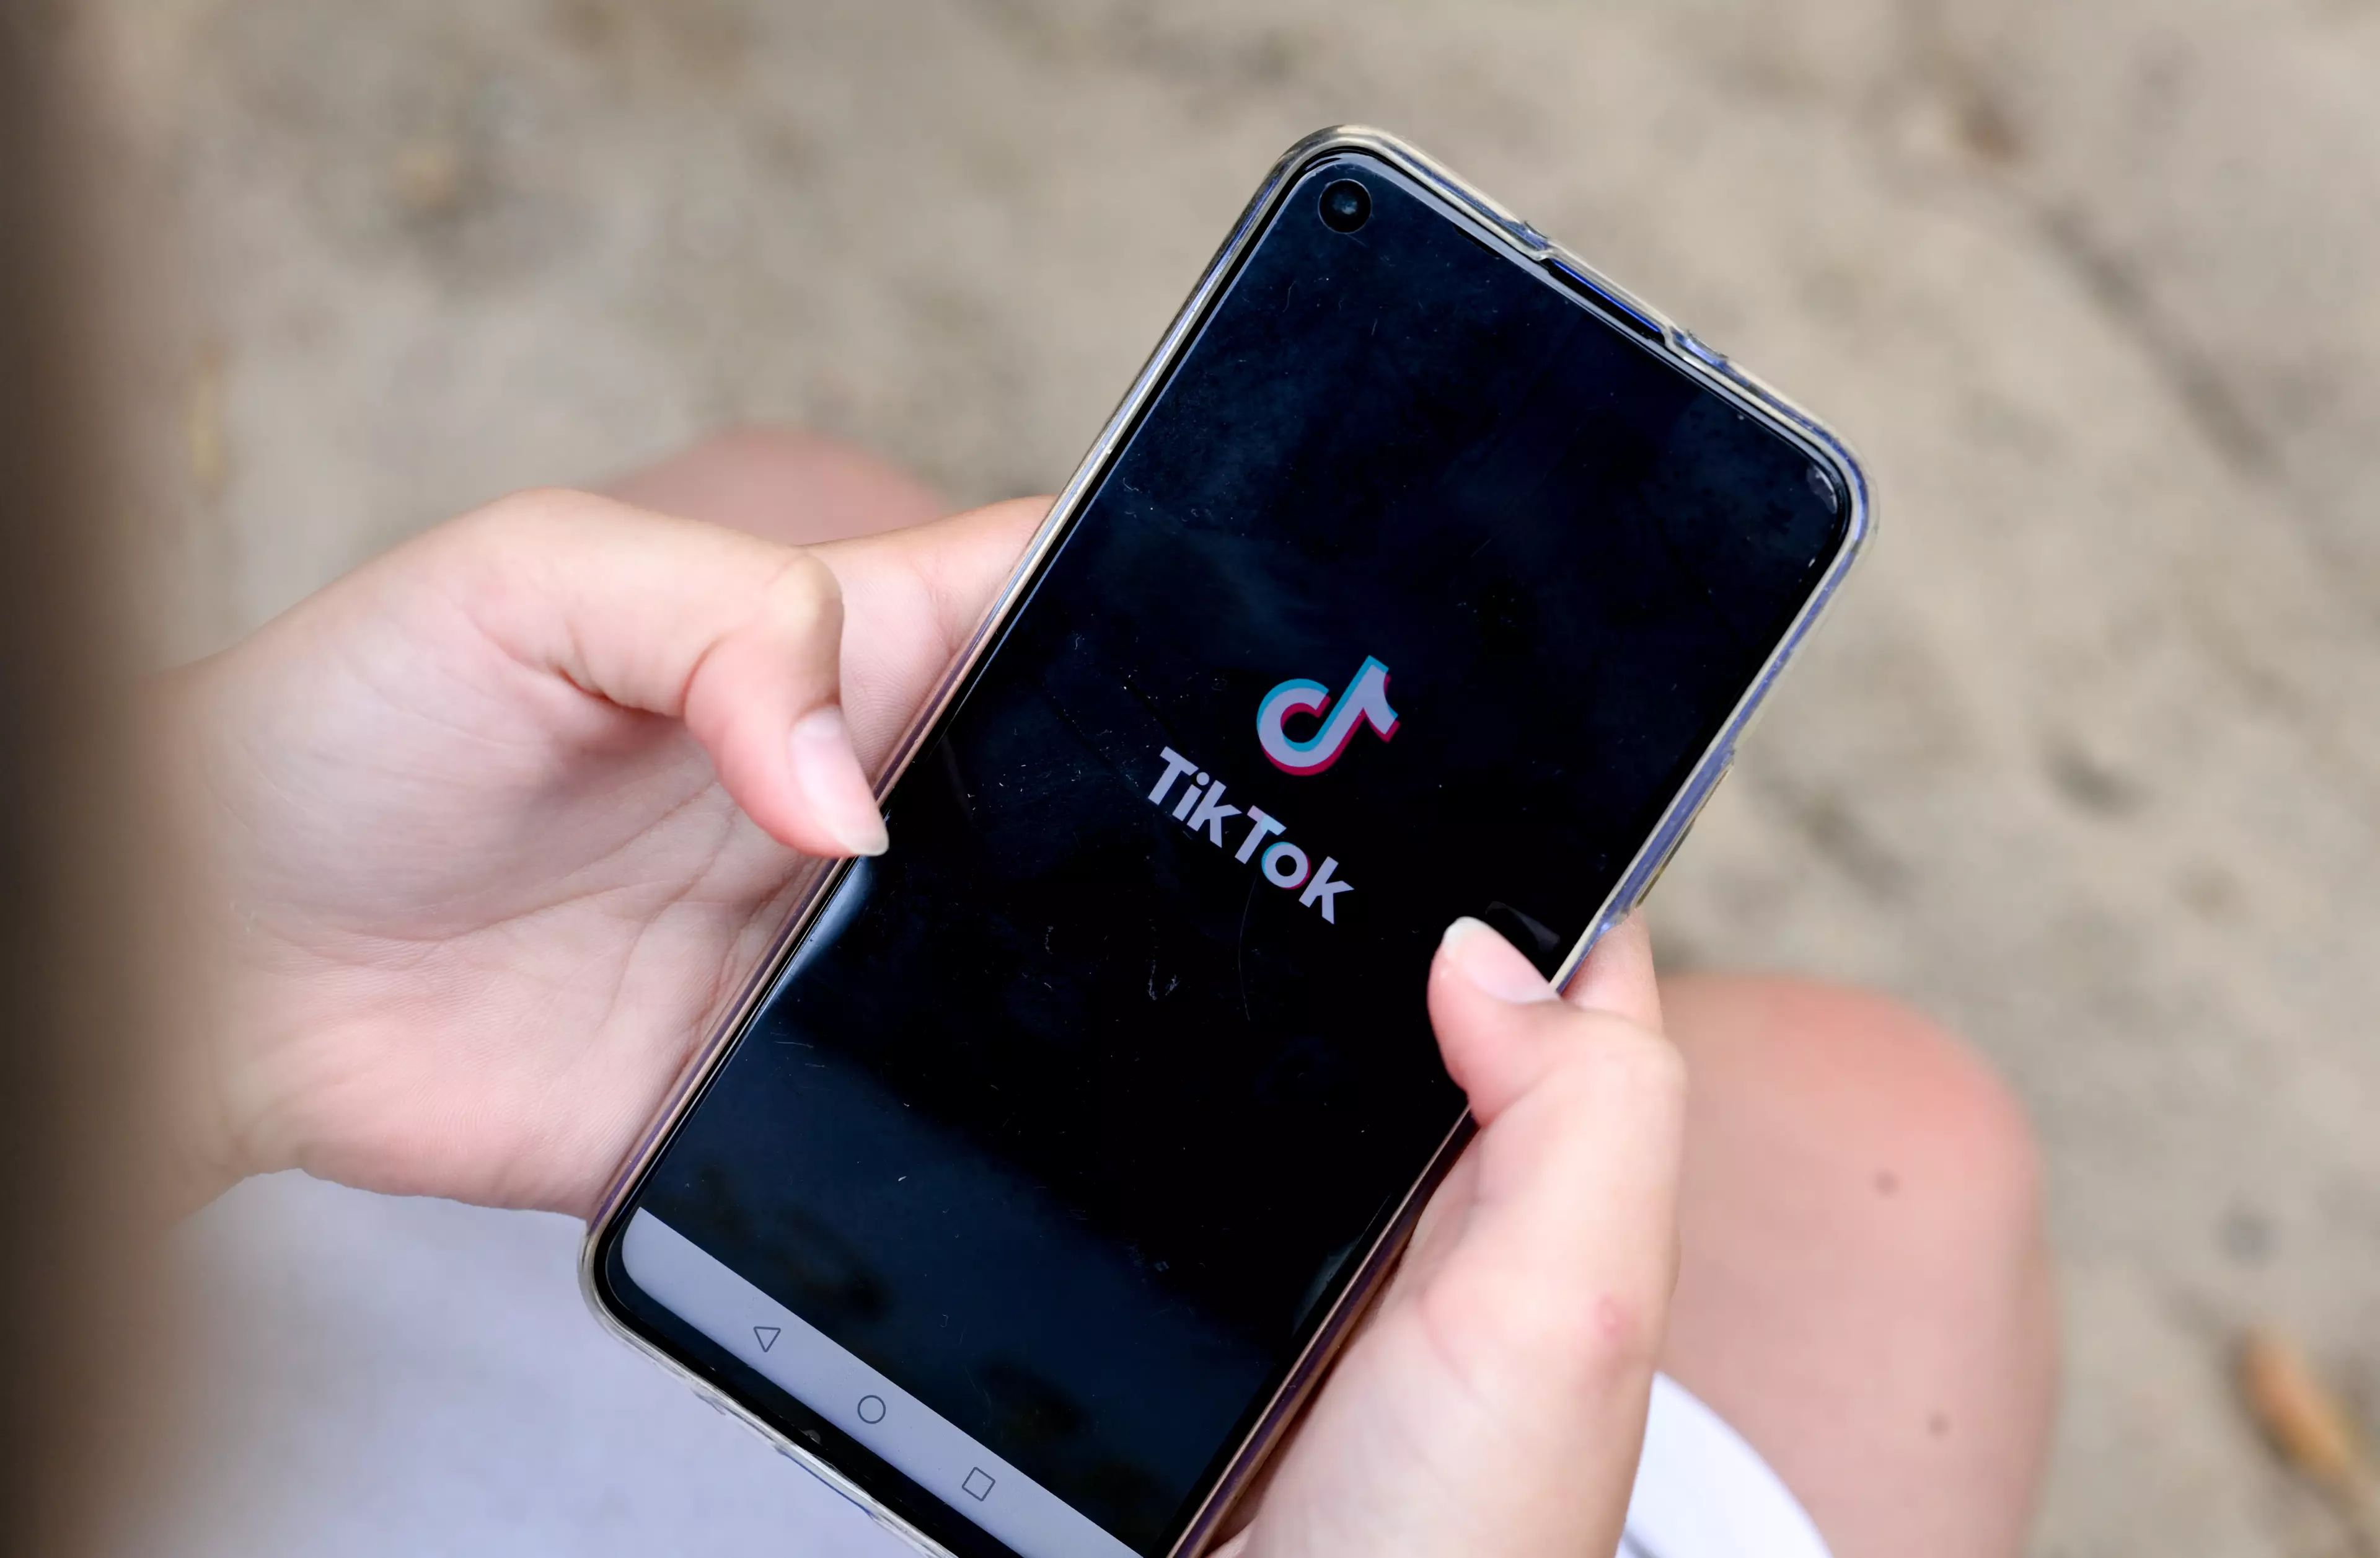 Women's charities have slammed an 'abhorrent' TikTok video which is rumoured to have promoted a 'National Rape Day' (